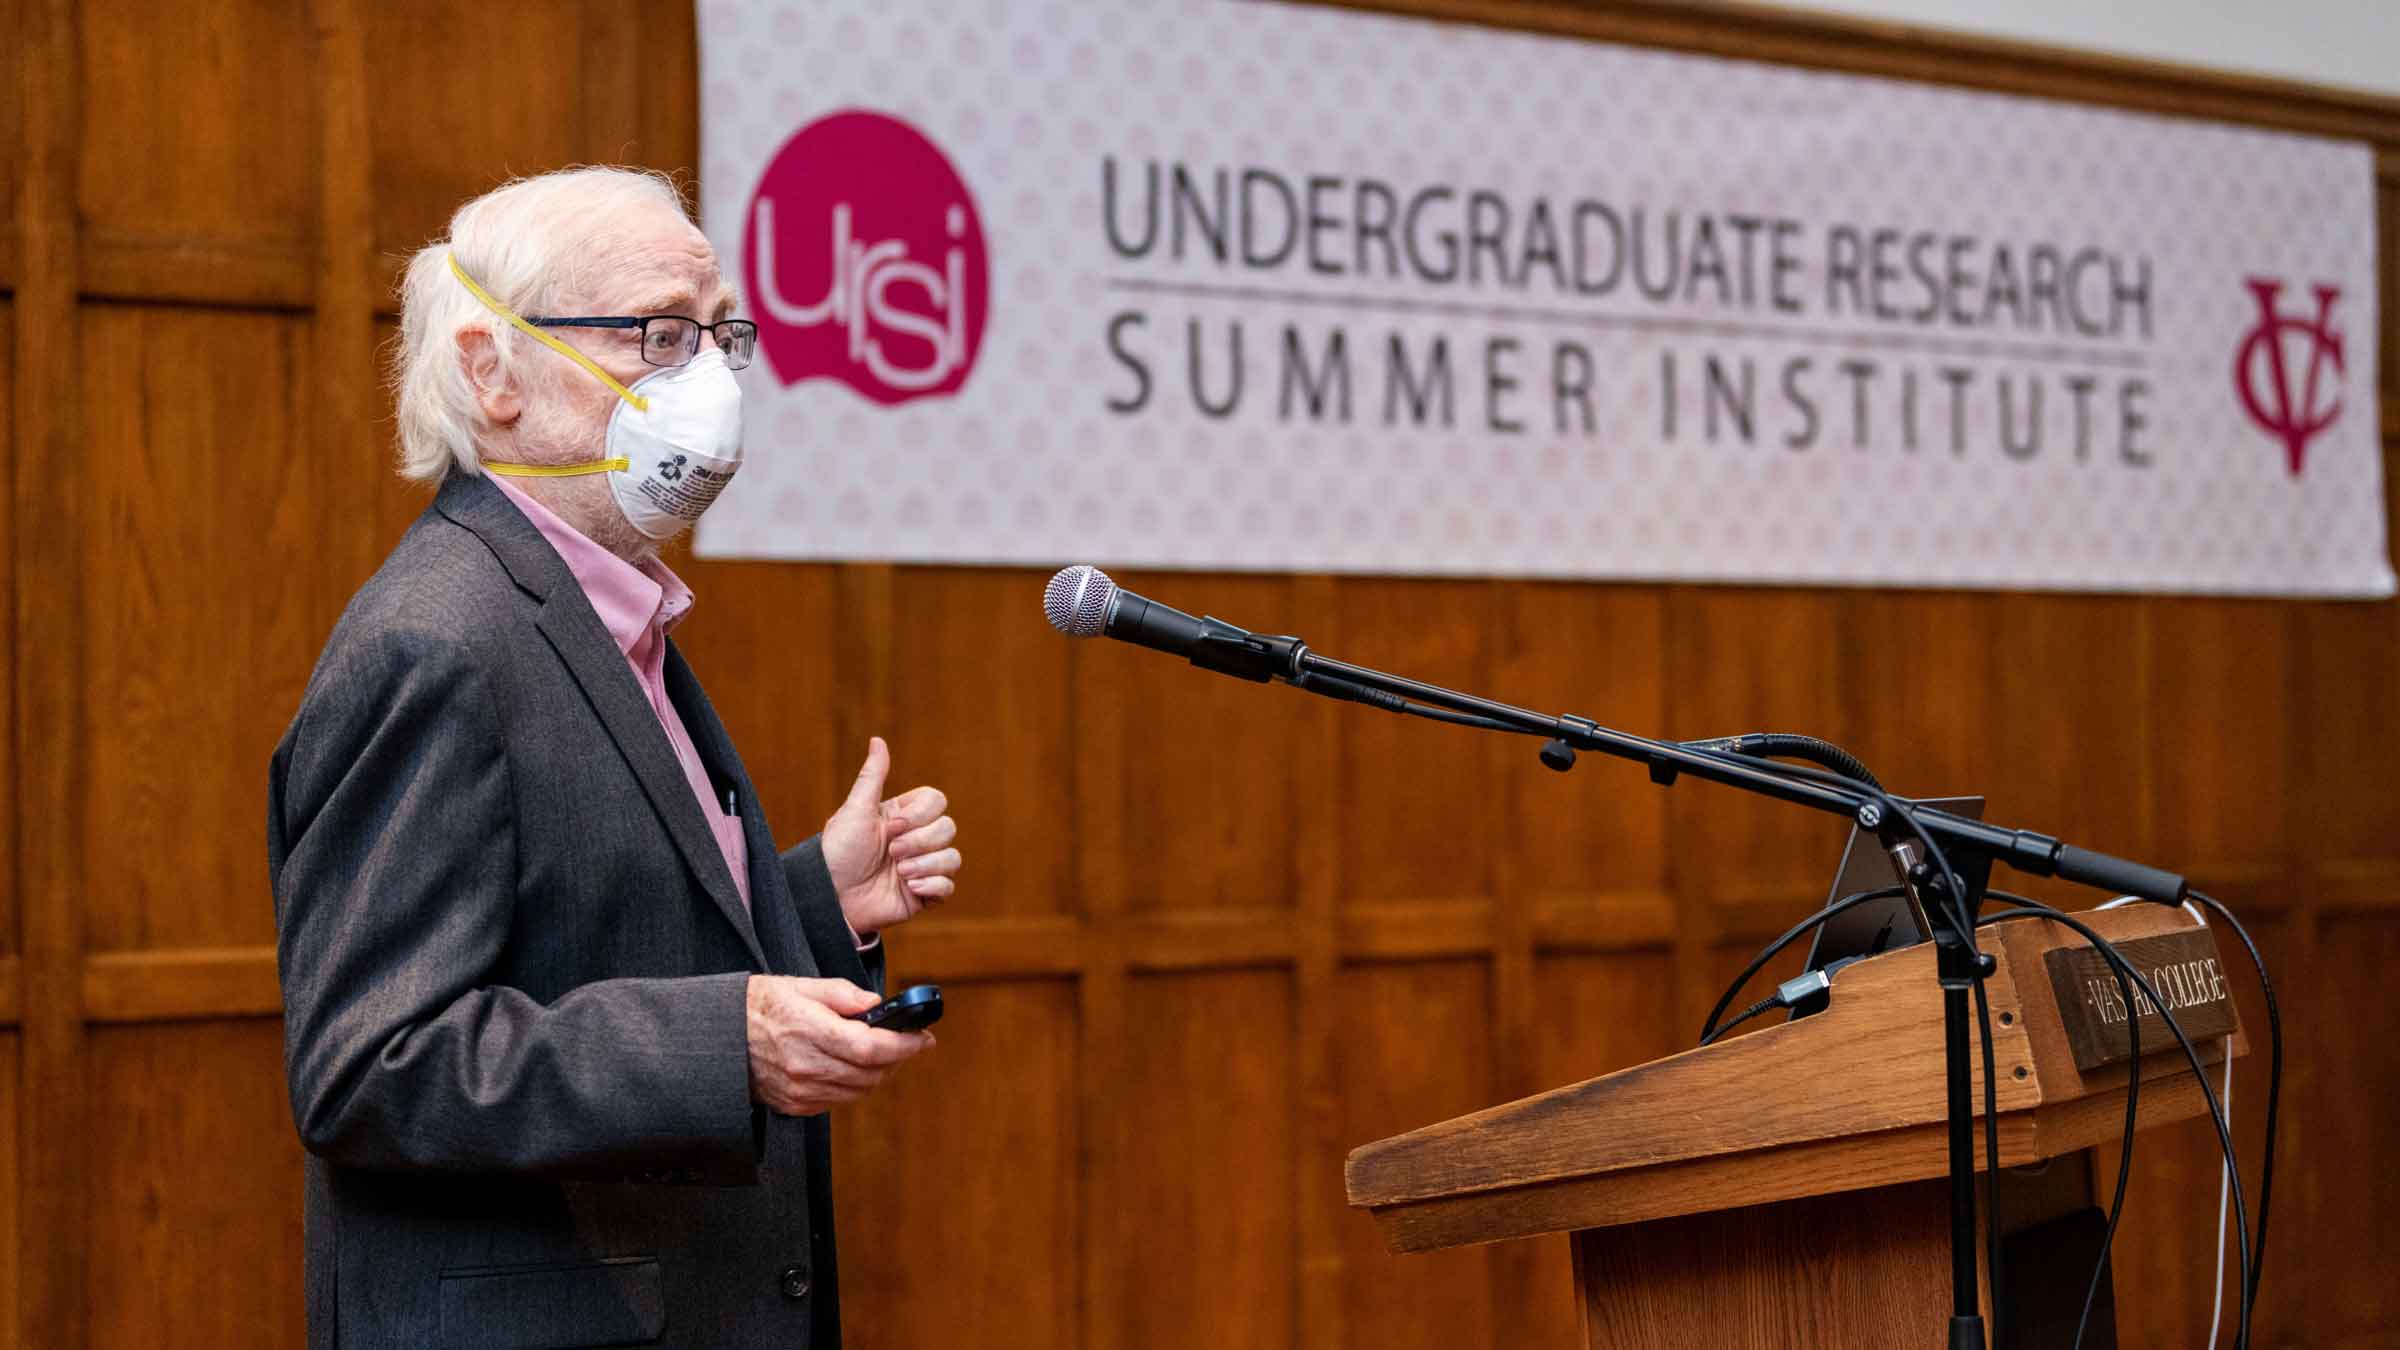 Masked speaker holding a slide clicker behind a podium with a microphone speaking to an audience off screen. There is a banner on the wall that reads: undergraduate research summer institute